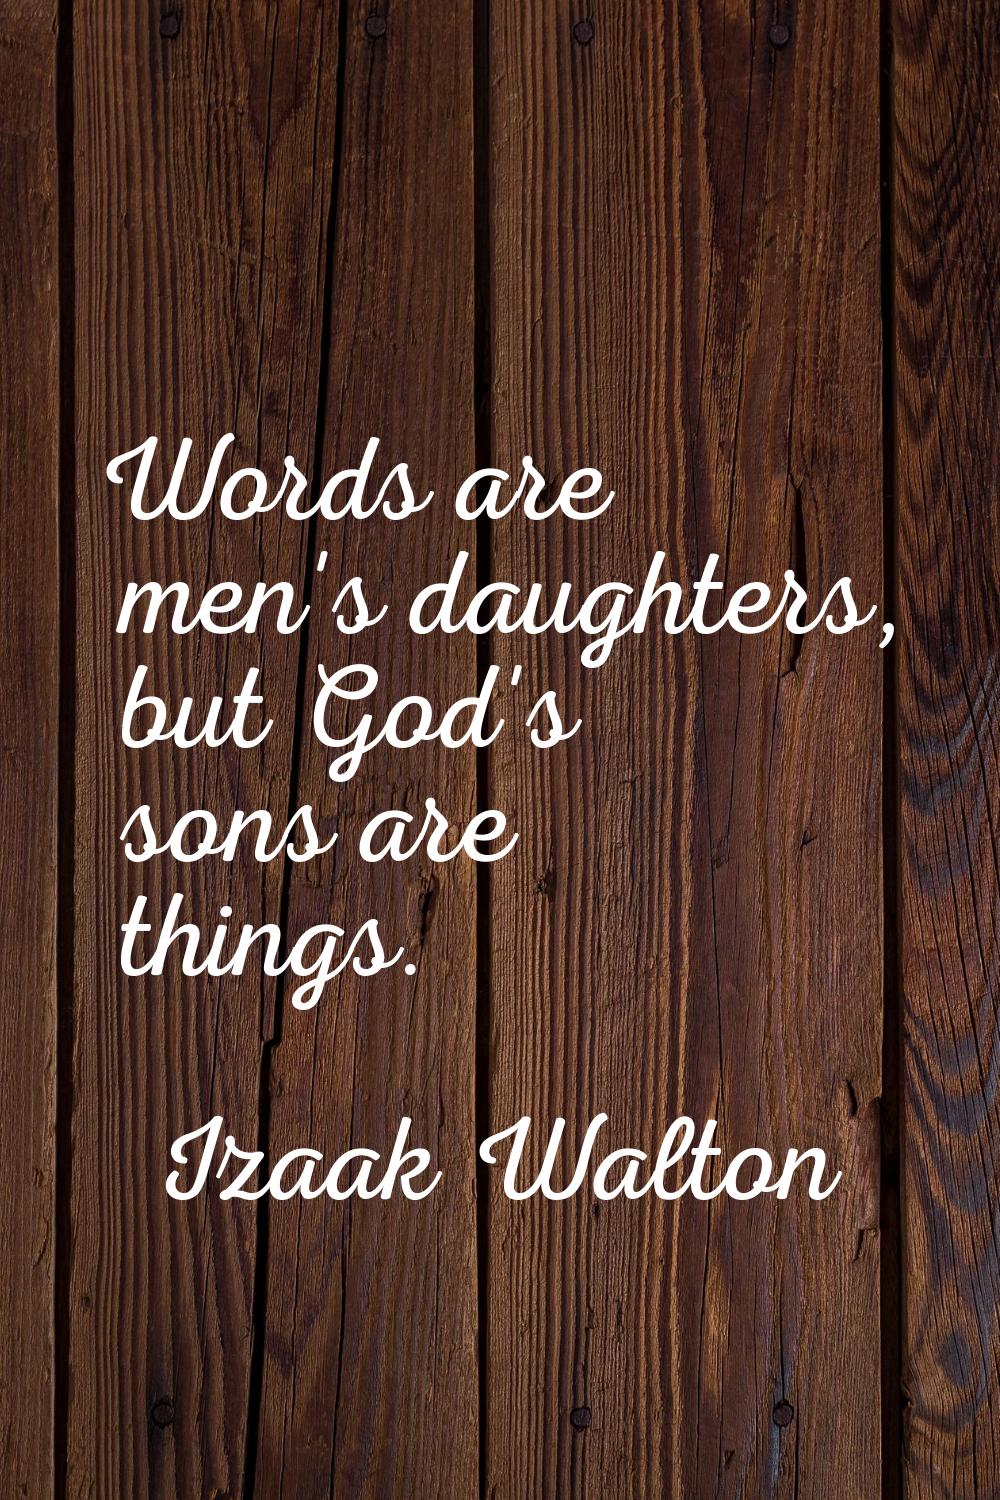 Words are men's daughters, but God's sons are things.